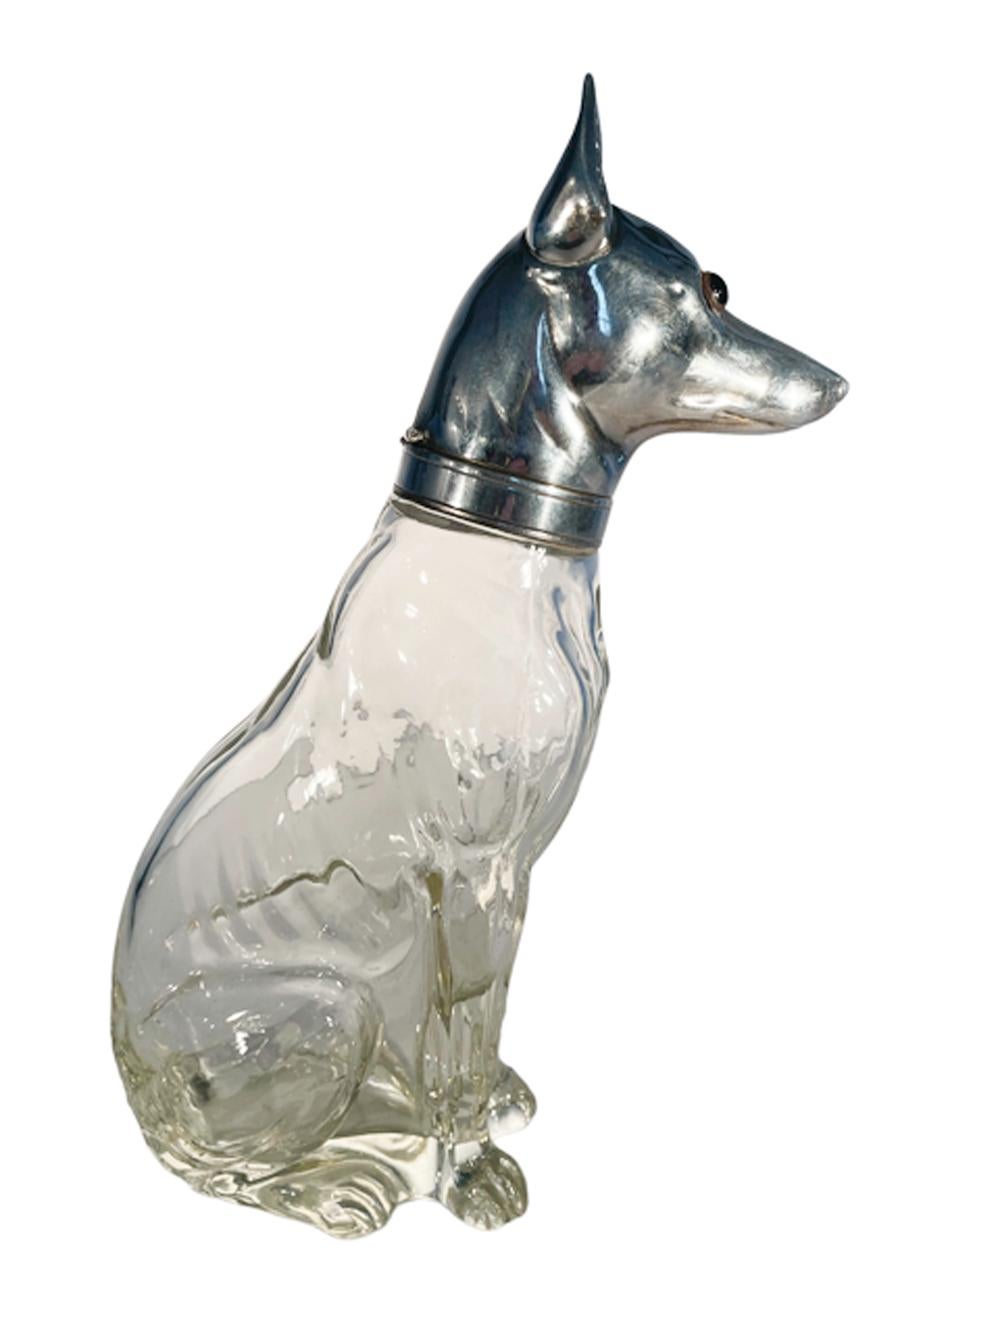 Art Deco Greyhound or Whippet Decanter Glass w/Silver Plate Head with Glass Eyes In Good Condition For Sale In Nantucket, MA